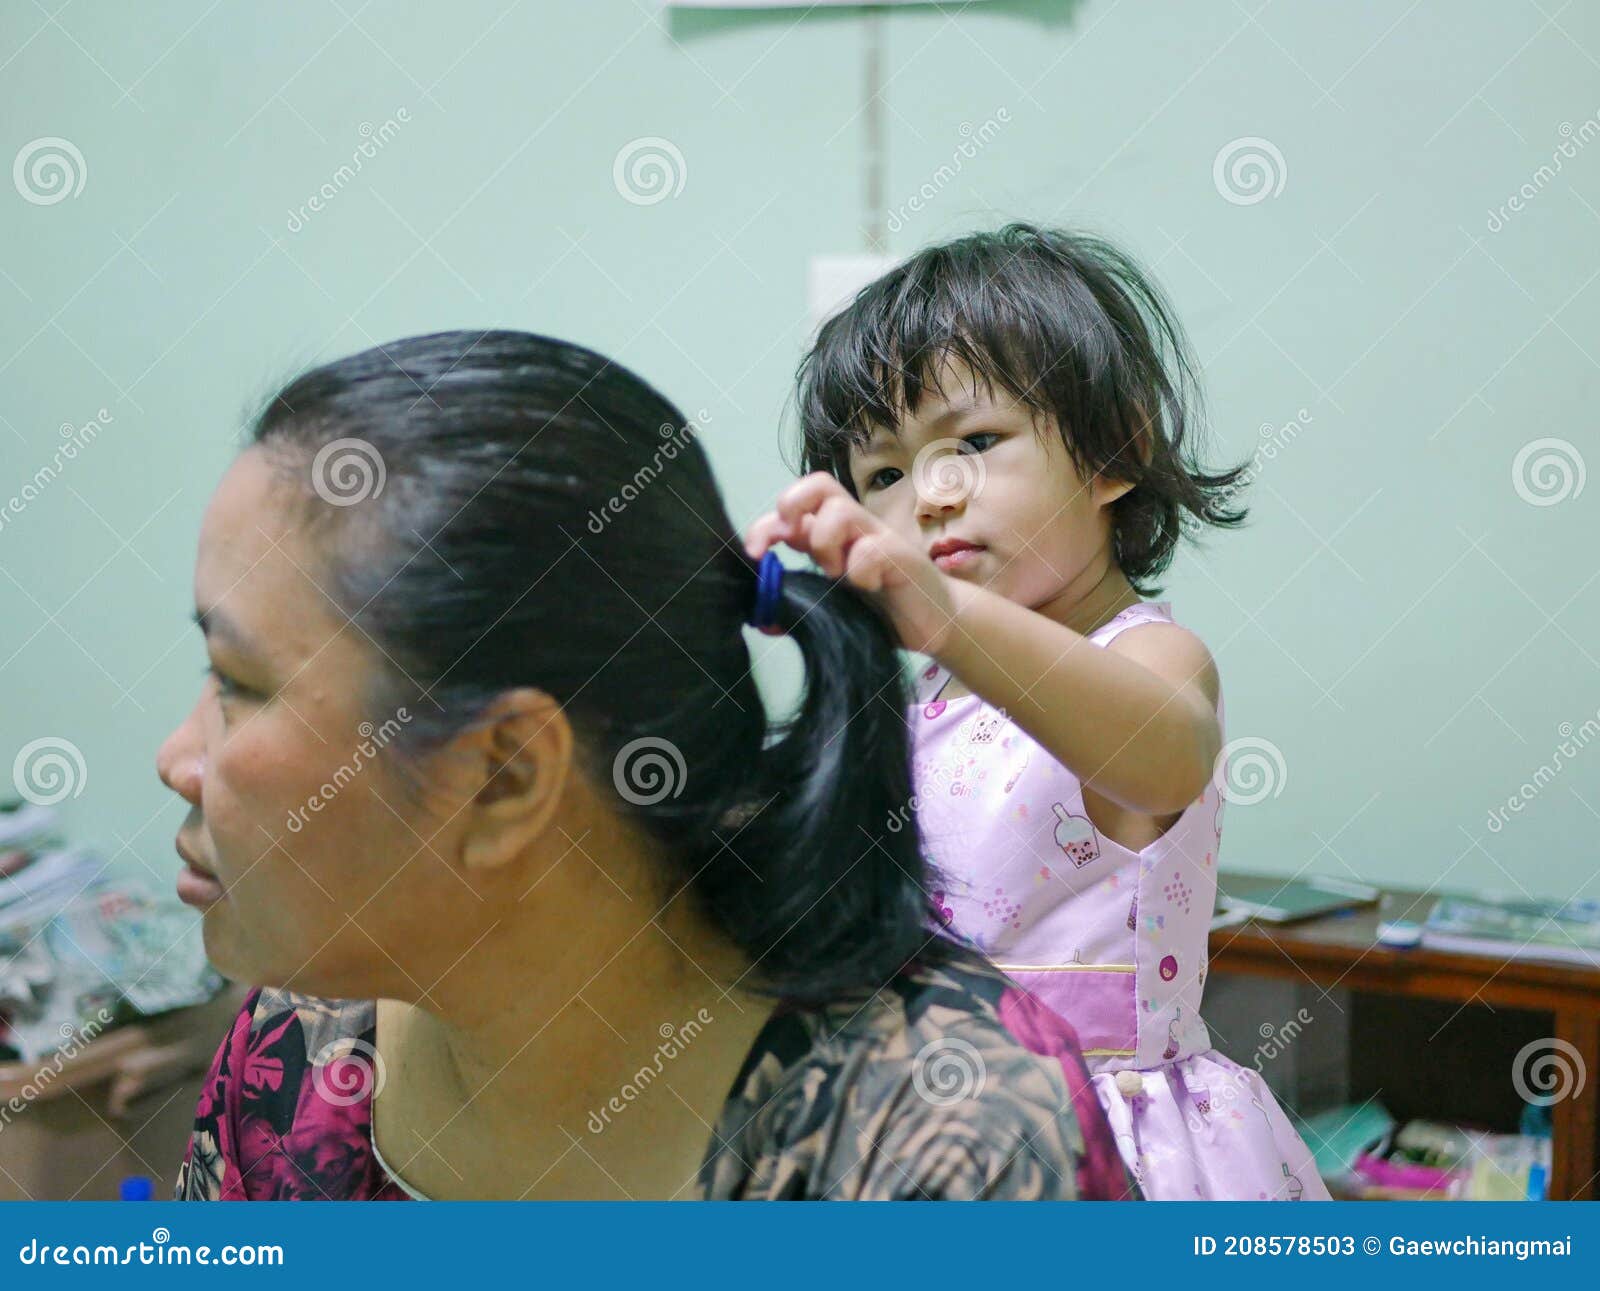 Little Baby Girl, 2 Years Old, Enjoys Playing / Pretending To Do Her  Auntie`s Hairs at Home Stock Image - Image of untie, little: 208578503